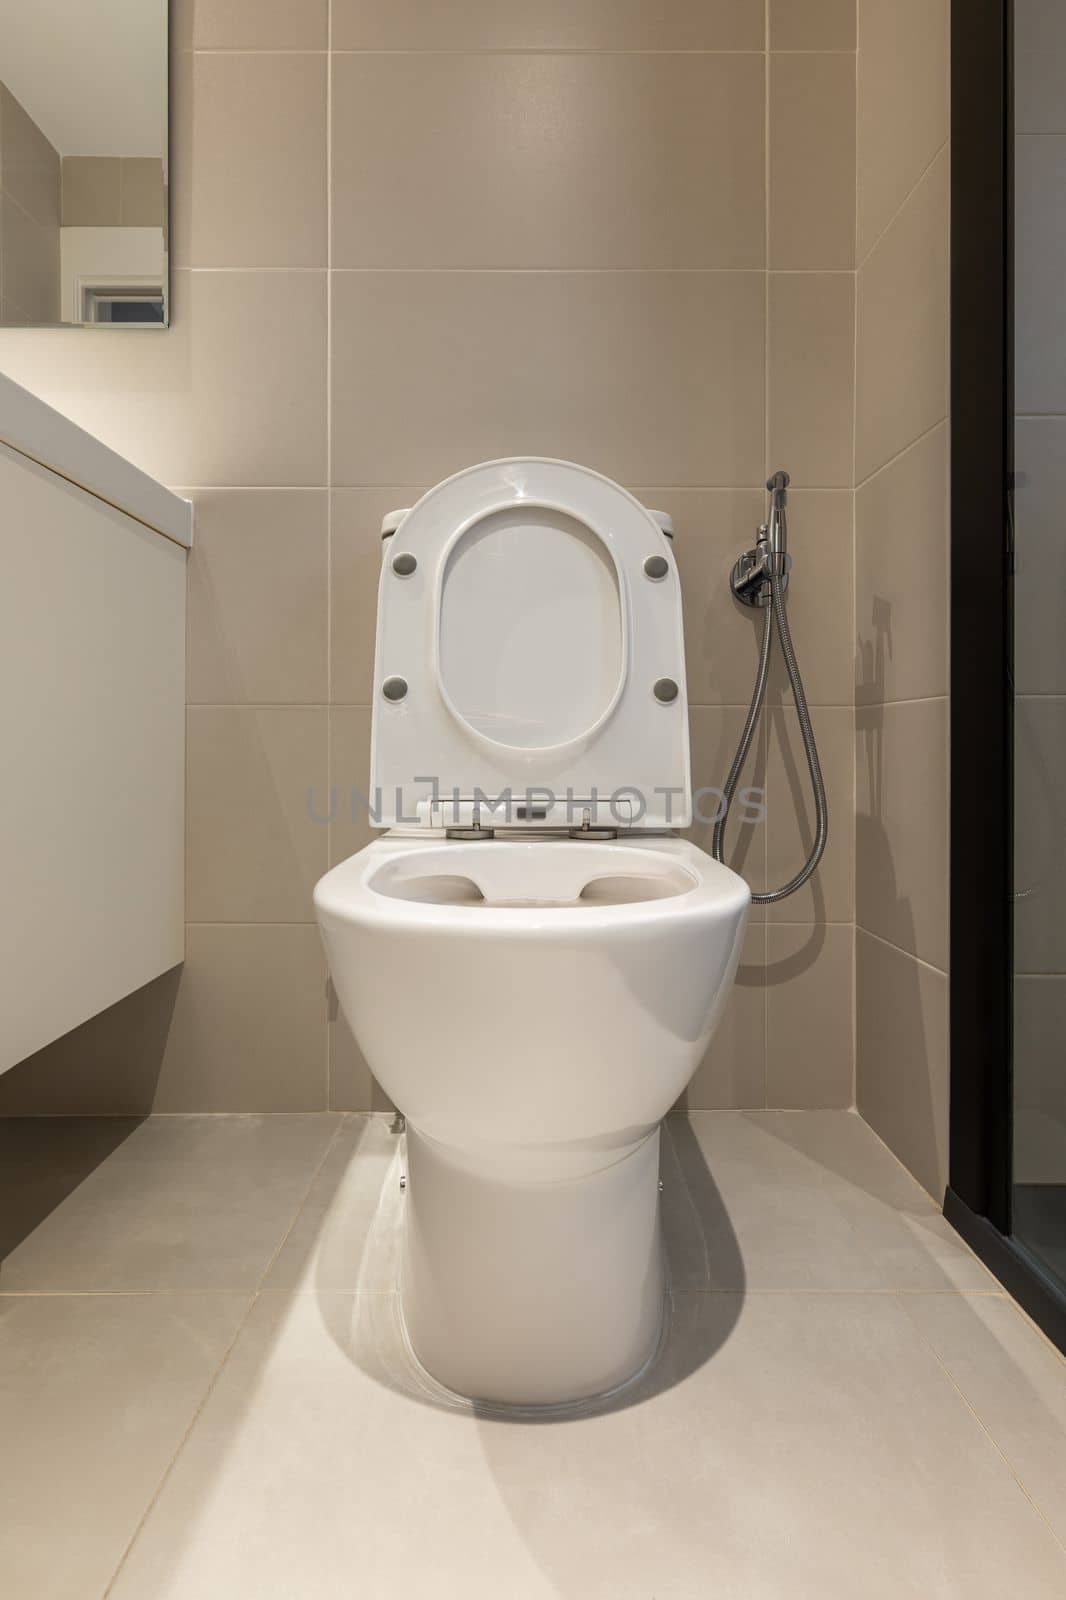 Raised toilet seat and bidet shower with wall mount in interior of modern bathroom.